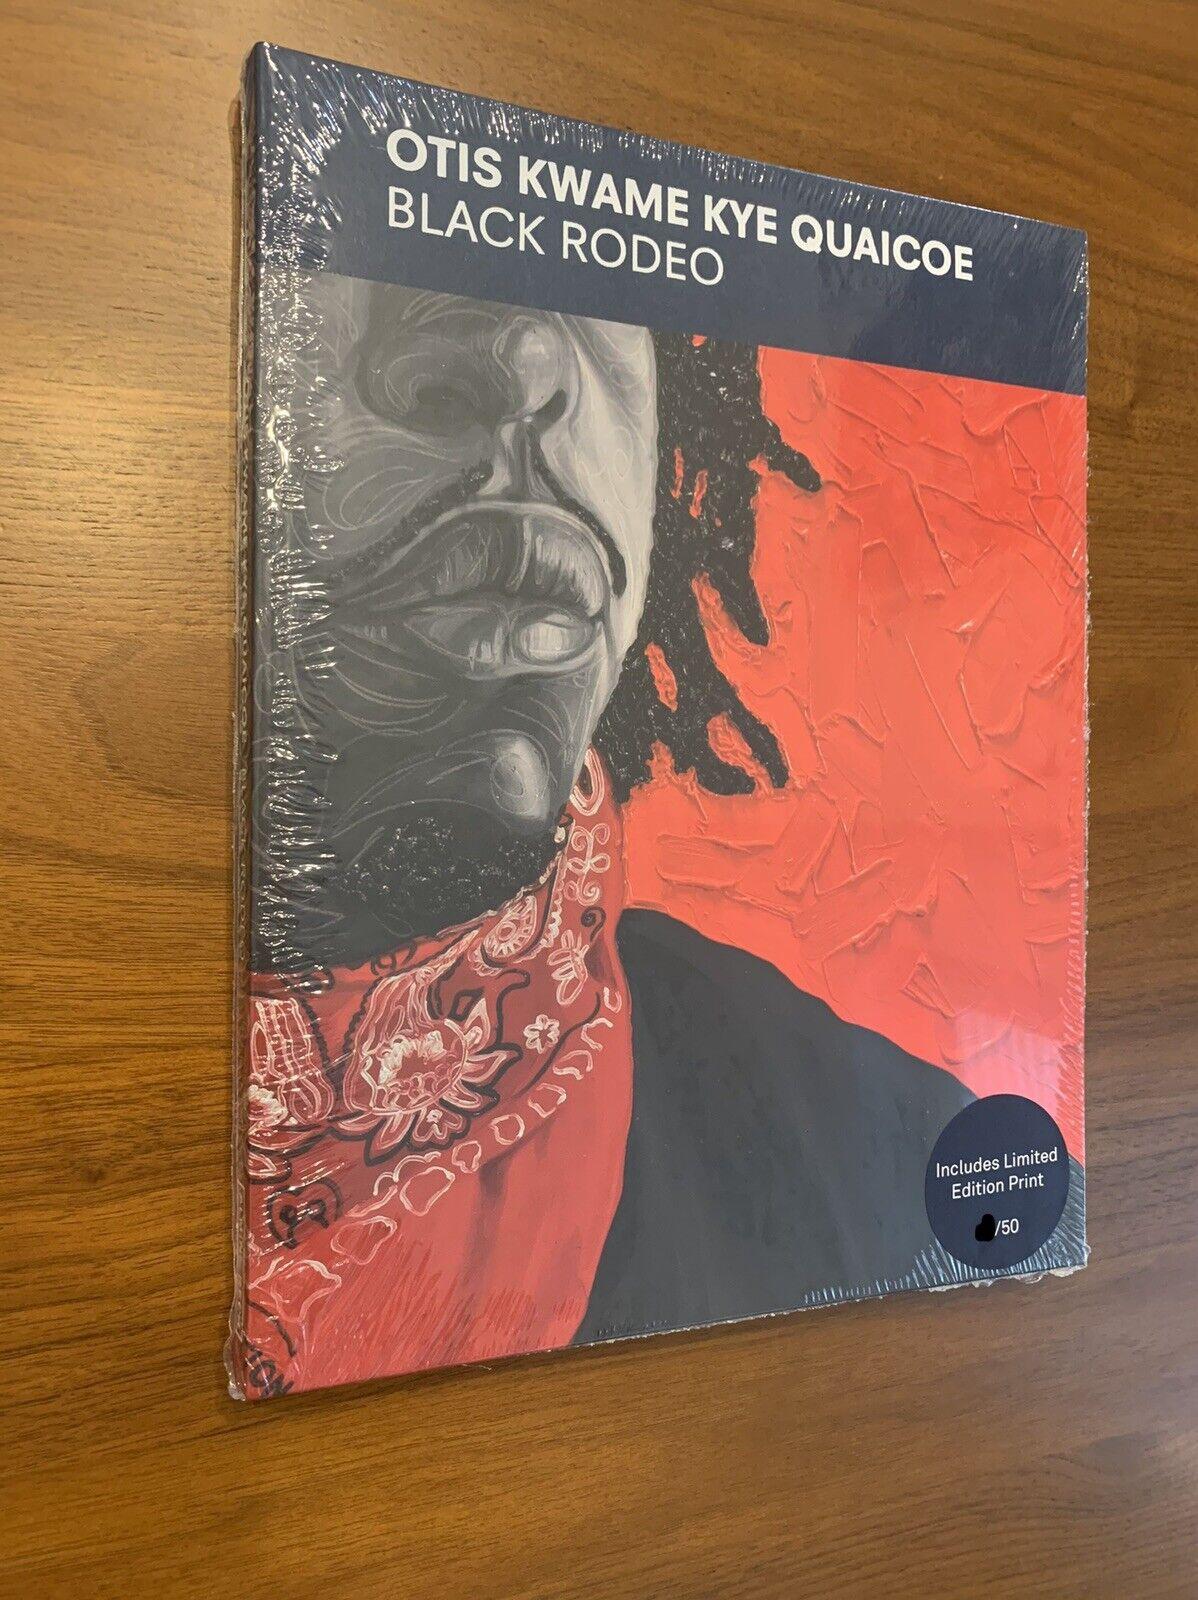 Otis Kwame Kye Quaicoe 
Black Rodeo (Special Edition) 
2022 

Book: 27.5 x 21.5 cm - 11 x 8 1/2 in 
Print: 25 x 20 cm - 10 x 8 in 
168 pages 
Hardcover, archival pigment print 
English/French 
Edition of 50 
Almine Rech Editions

ISBN: